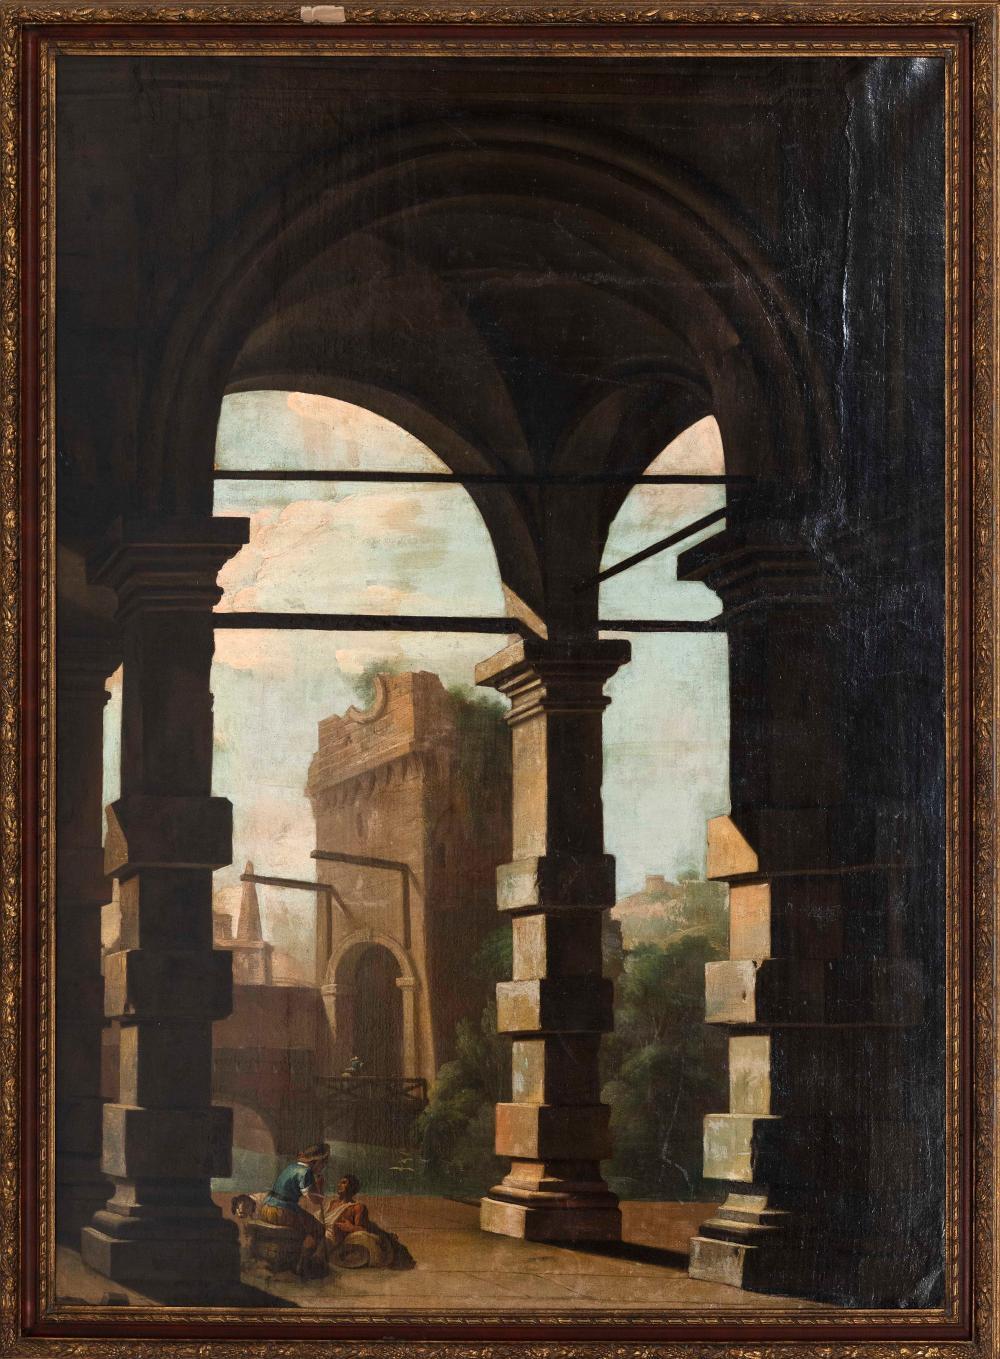 Pair of grand scale oil on canvas Capriccios by a Follower of Viviano Codazzi. Mid to late 17th century of ruins and figures. Neoclassical landscape. Beautifully imagined arches with figures, riding horseback, and engaging in activities.